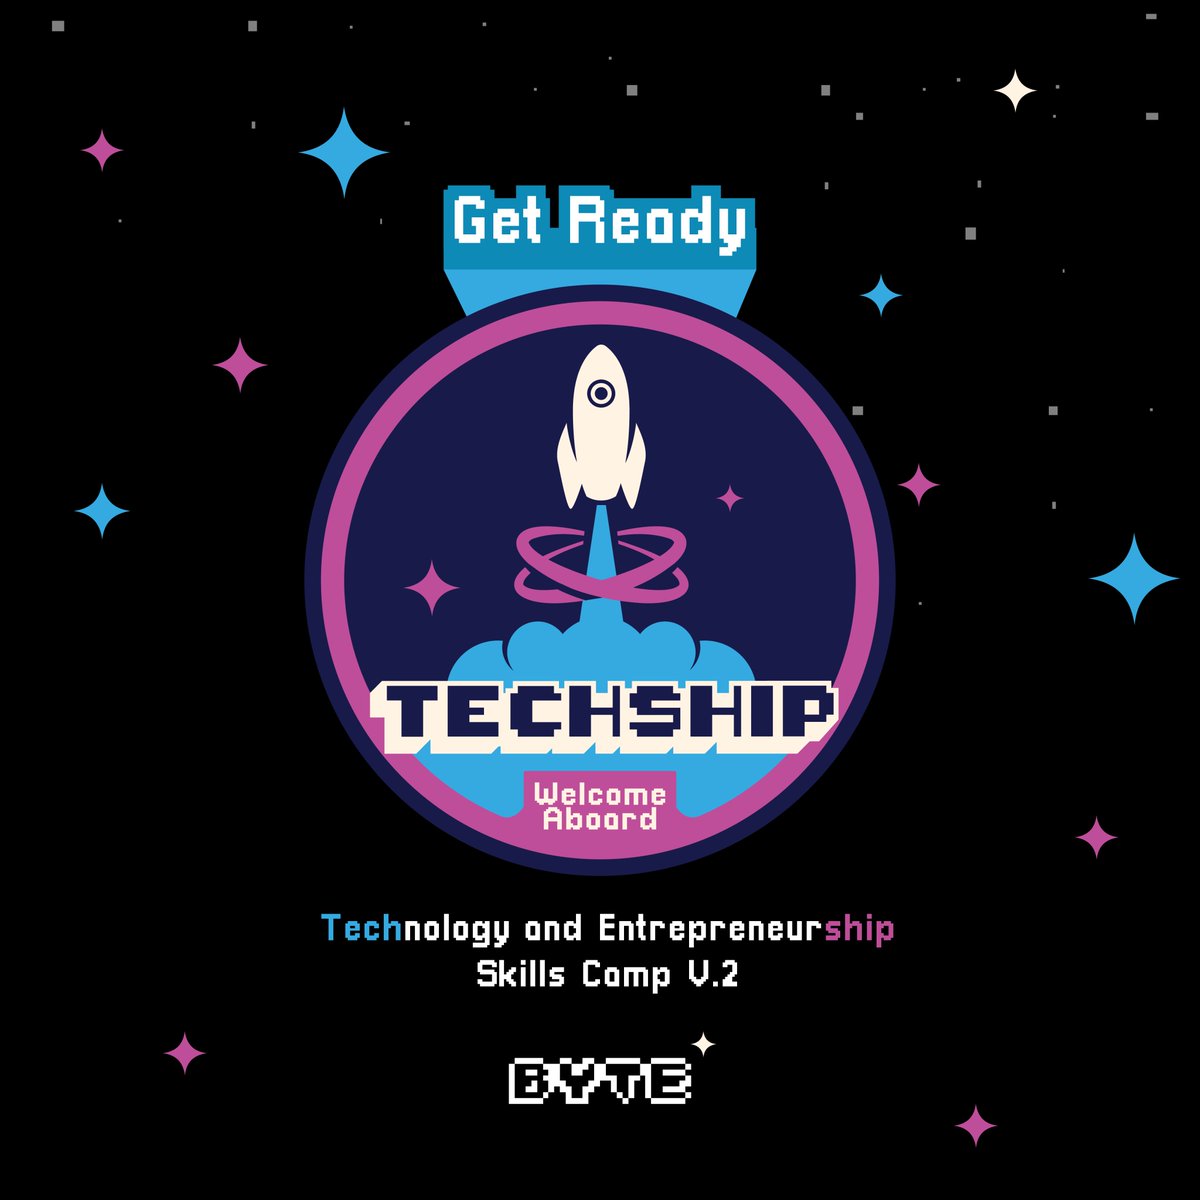 Are You Ready to Elevate your Technology and Entrepreneurship Skills?💡
TechShip is preparing for another six transformative adventures! Stay Tuned and Ready to Join Us🚀⏱️

#TechShip🚀
Welcome Aboard!
Funded by US State Department through Alumni Engagement Innovation Fund (AEIF)